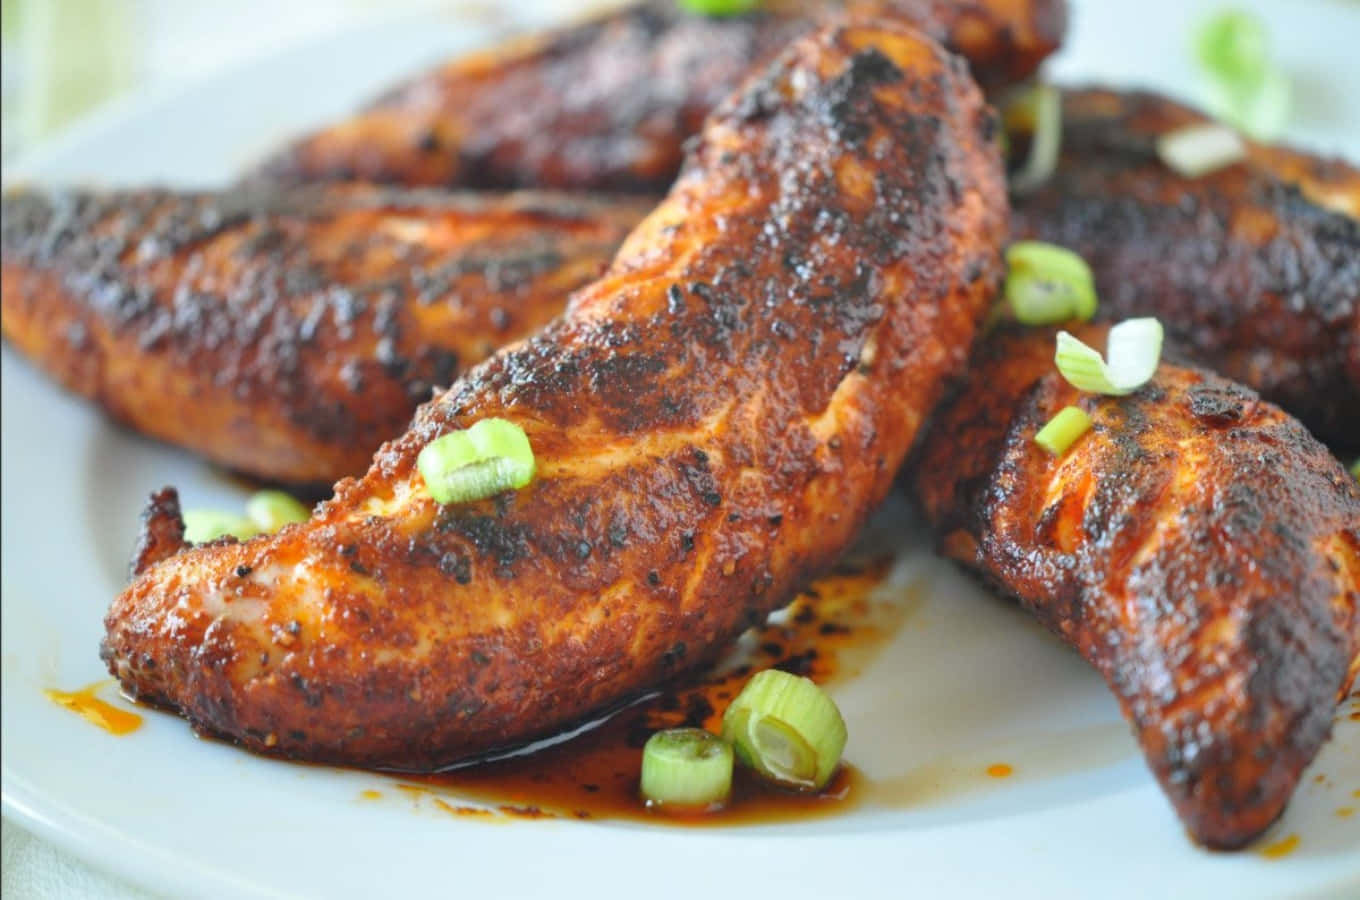 Spice up your next meal with delicious blackened chicken! Wallpaper